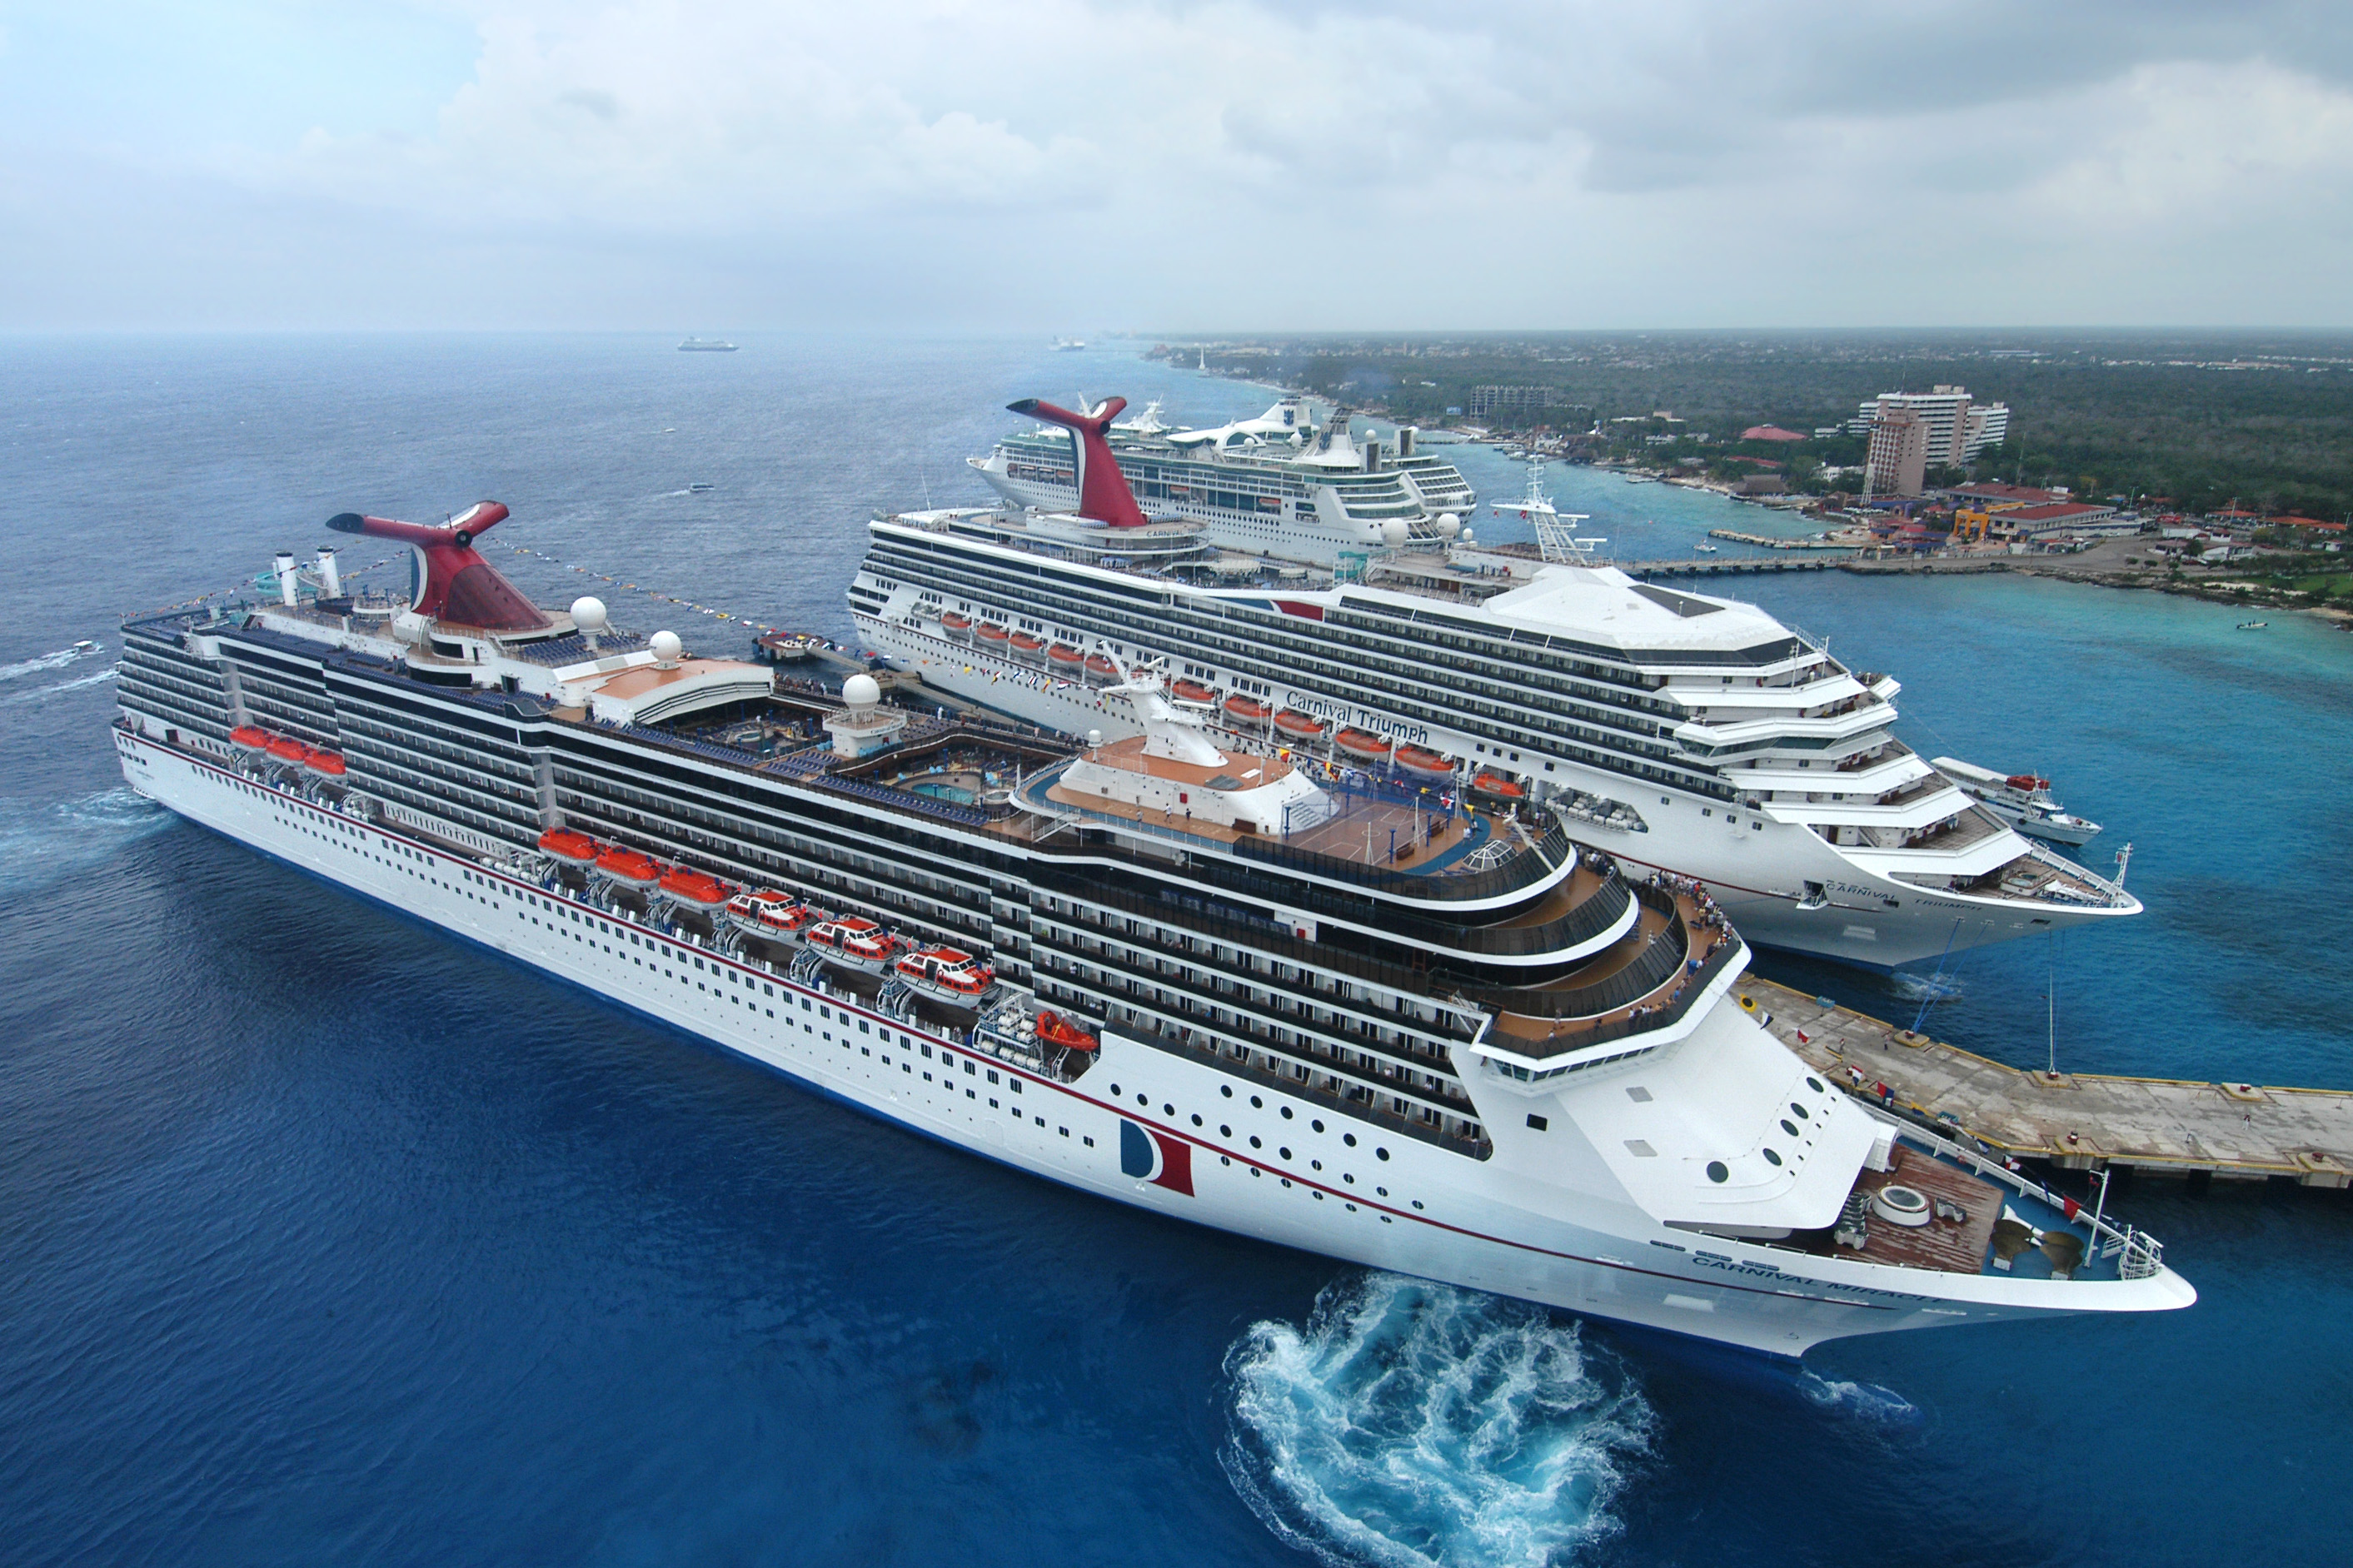 Carnival announces more delays to its cruise ships restarting cruises